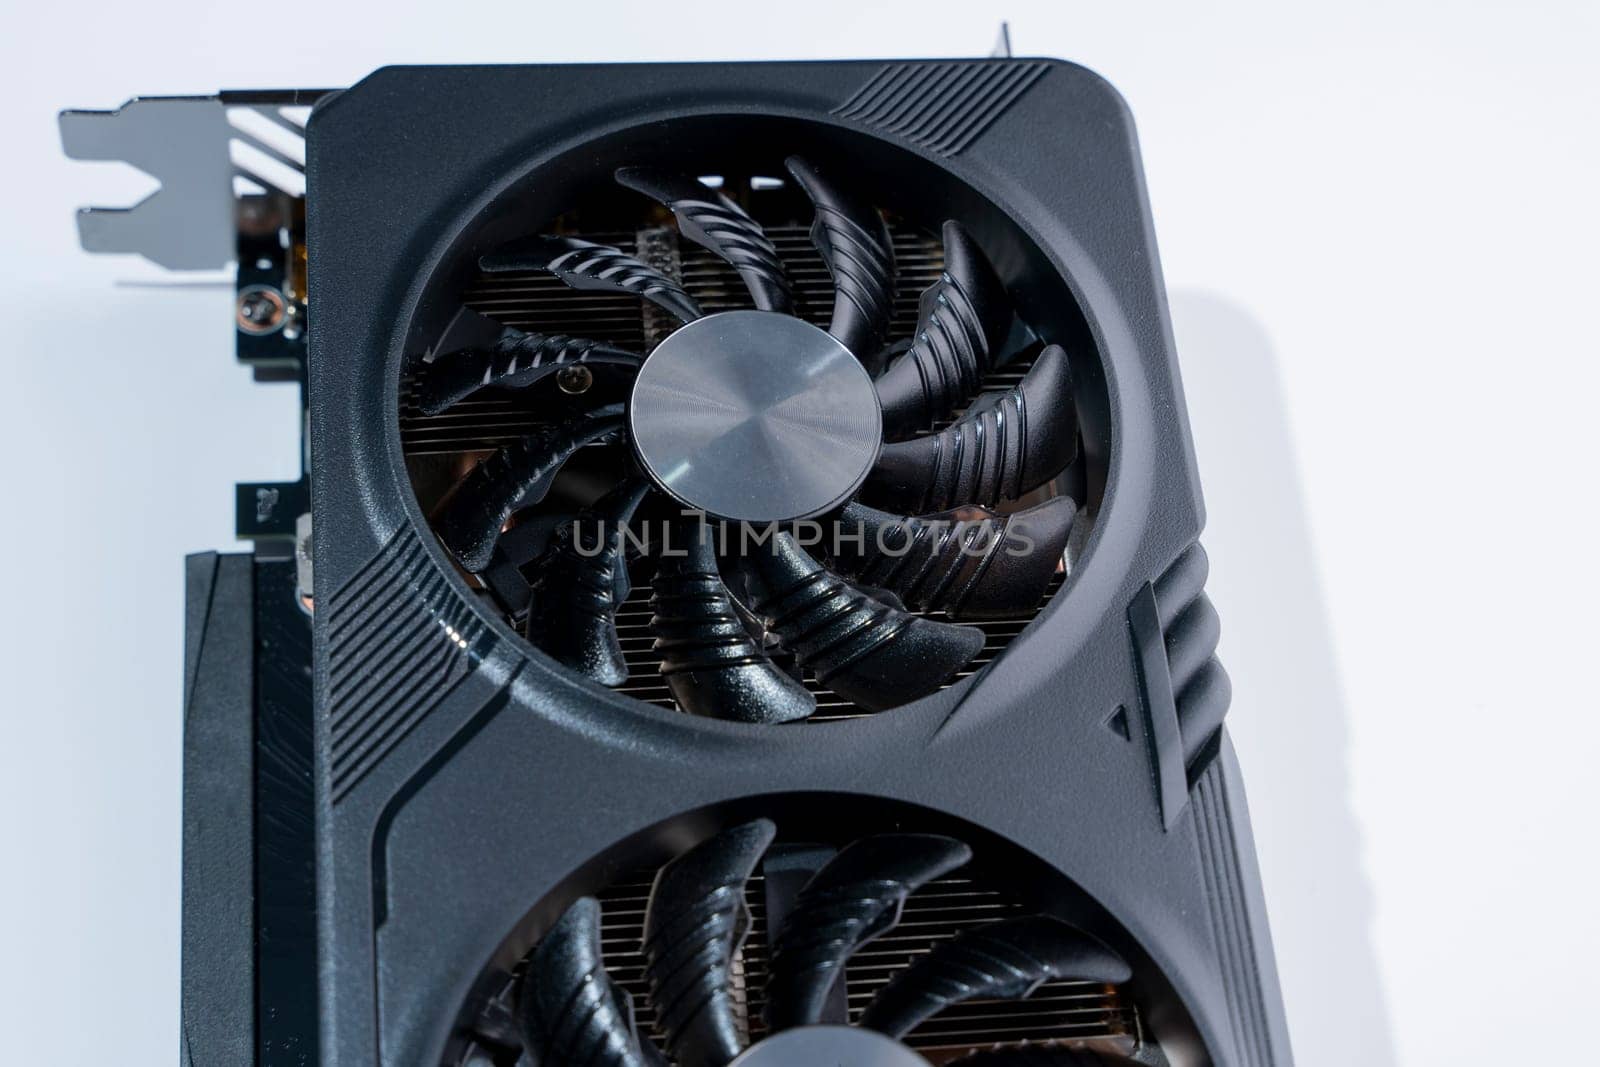 a modern powerful gaming graphics card for a computer with three fans. the concept of PC hardware. Gaming video card